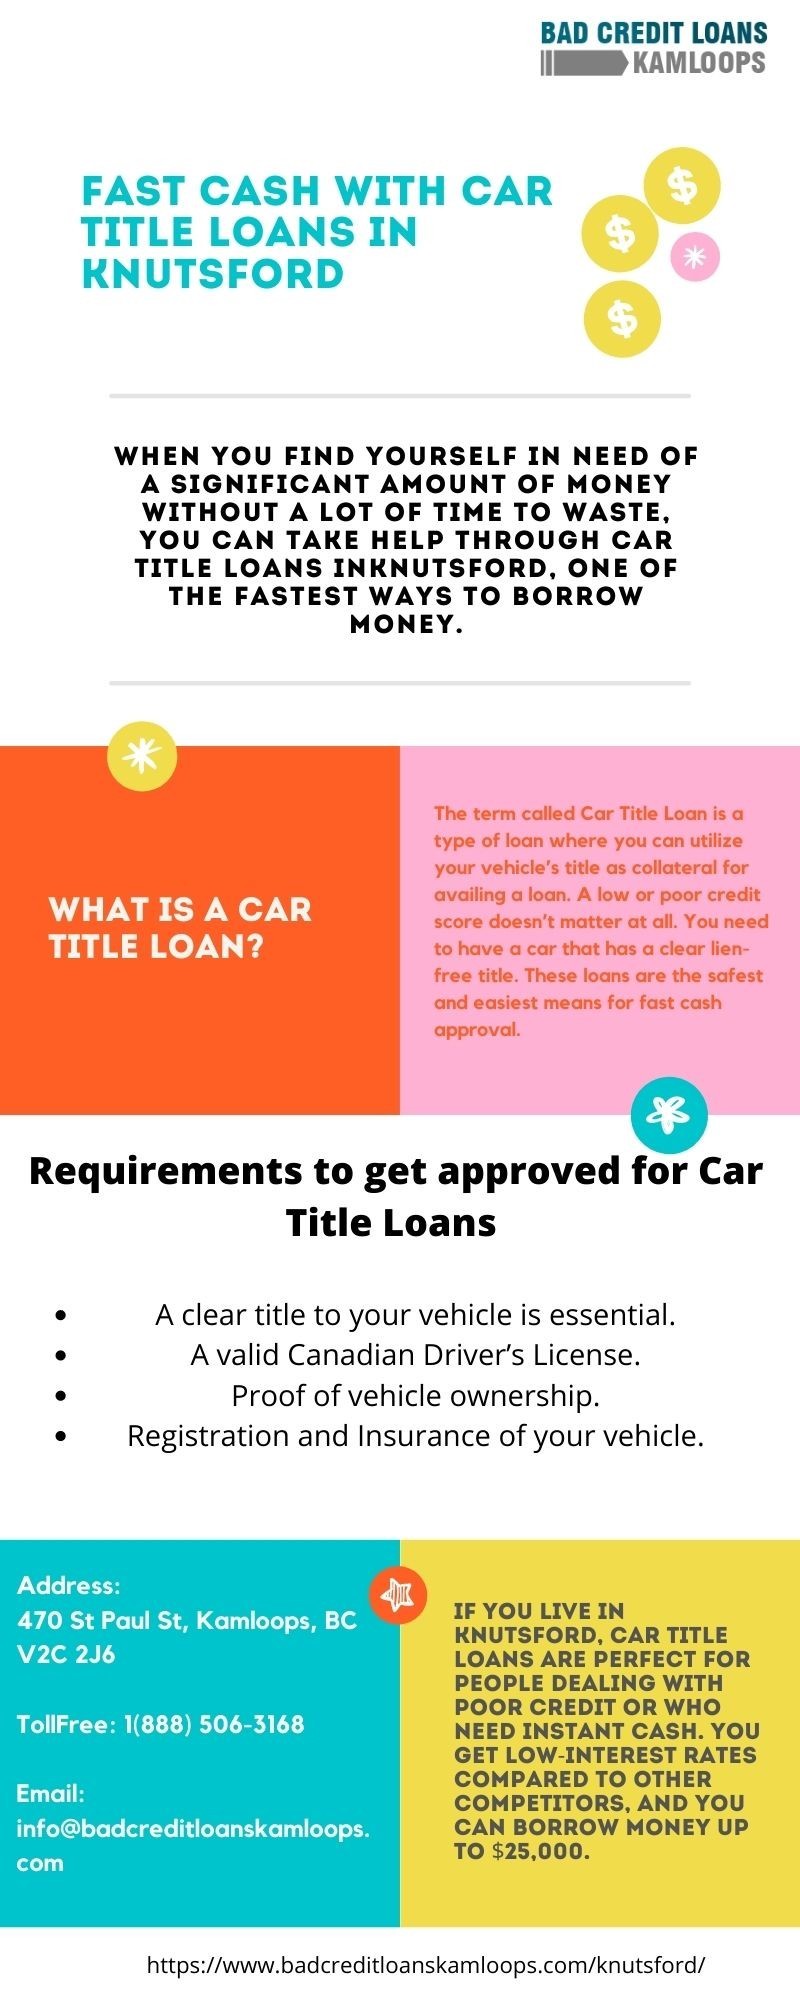 Fast Cash with Car Title Loans in Knutsford